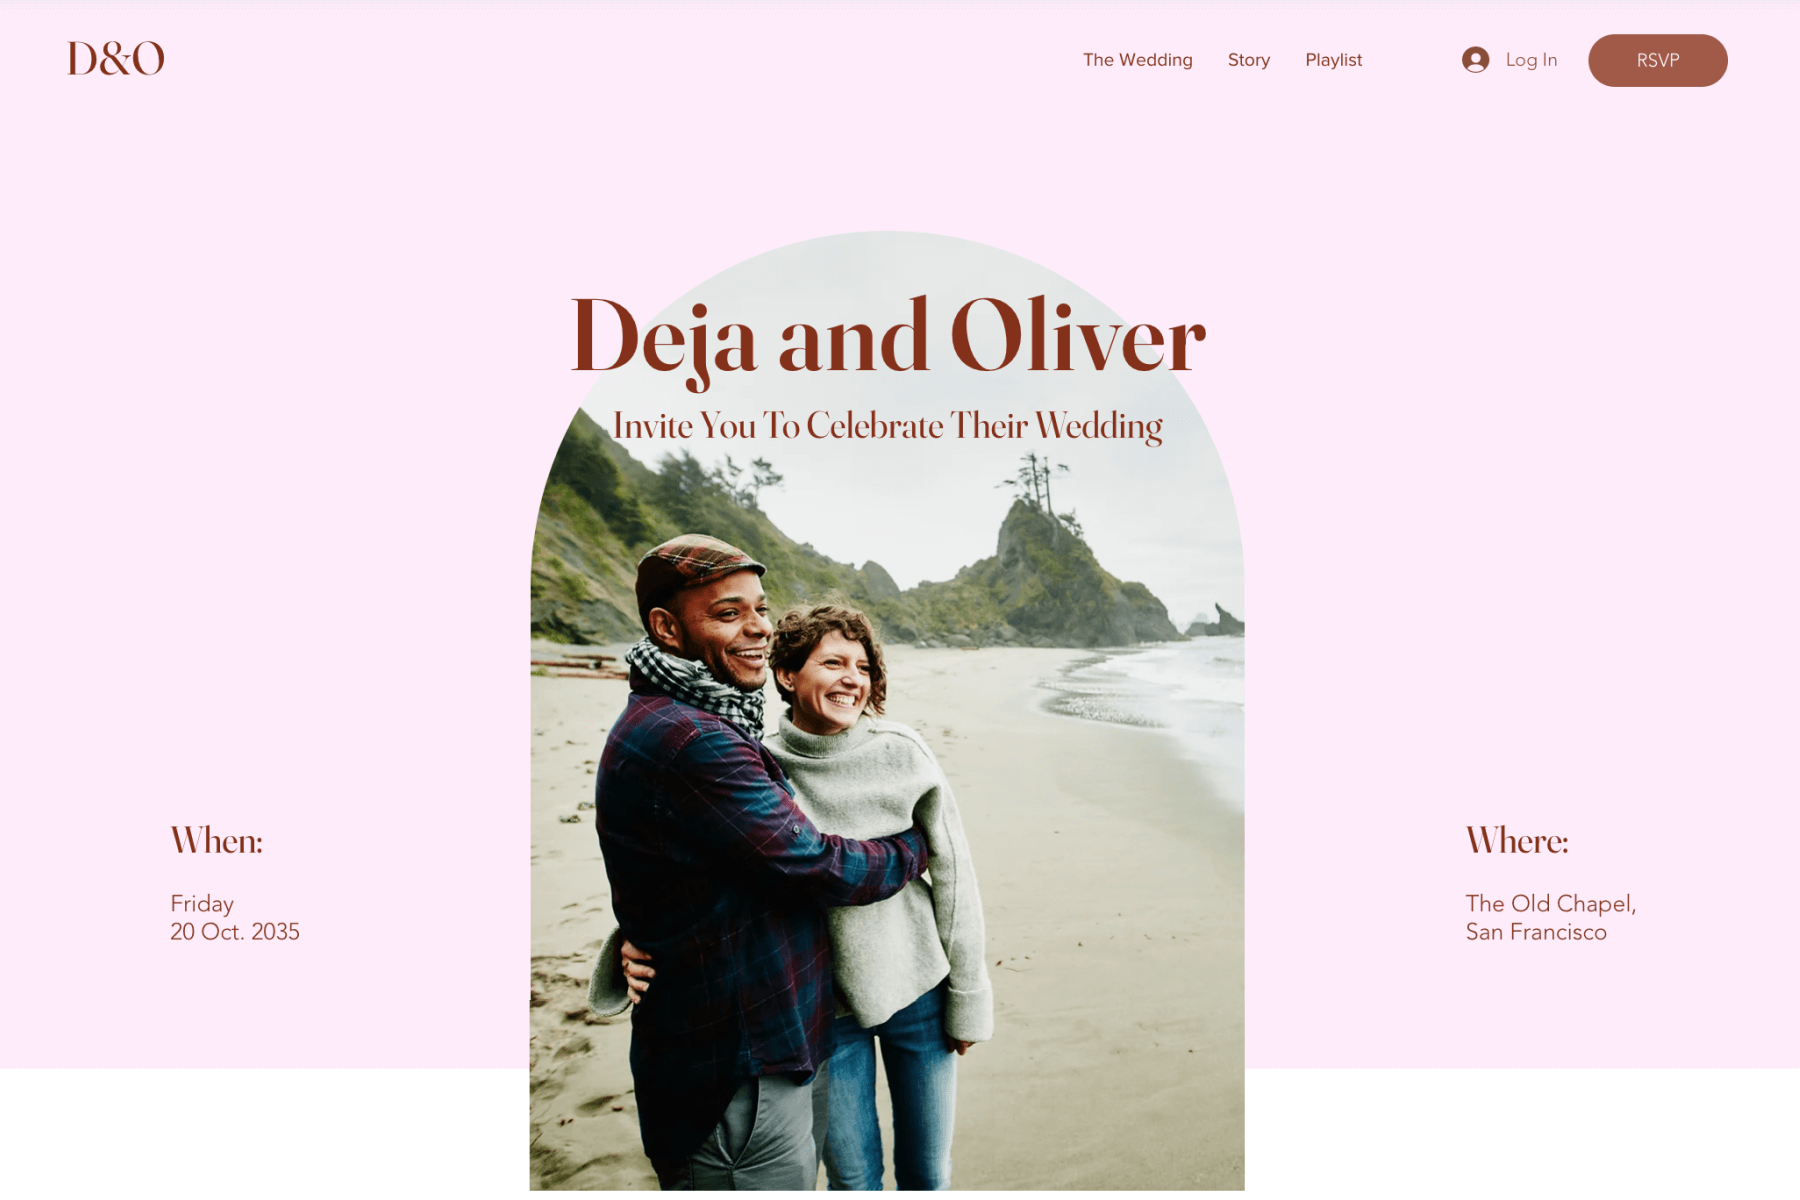 A screenshot of a wedding website shows a man and woman embracing on a beach in an arch-shaped photo, surrounded by a pink backdrop and the names “Deja and Oliver.”